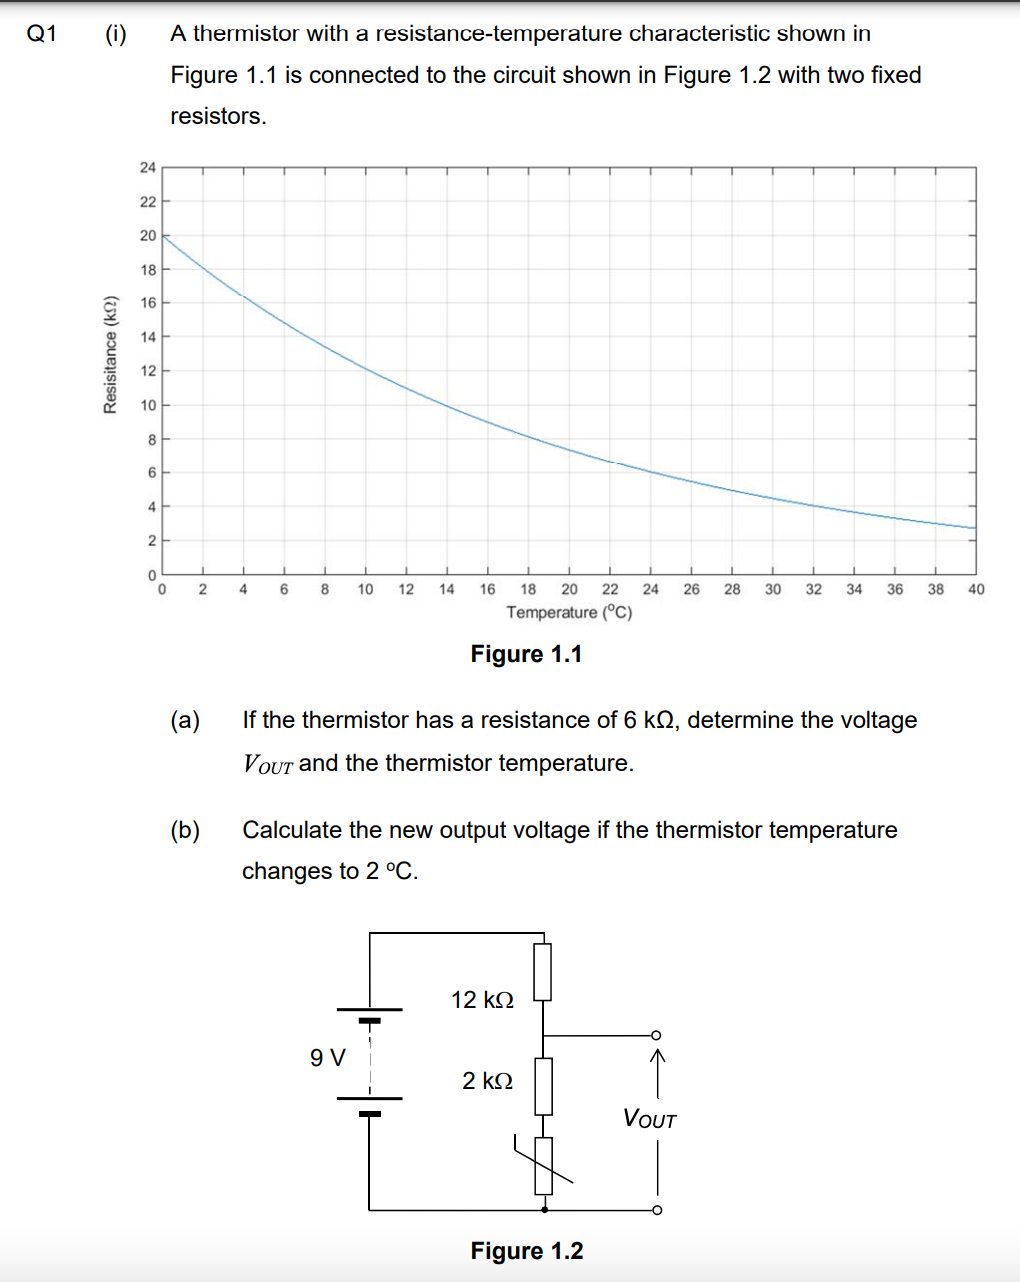 Q1
(i)
A thermistor with a resistance-temperature characteristic shown in
Figure 1.1 is connected to the circuit shown in Figure 1.2 with two fixed
resistors.
24
22
20
18
16
14
12
10
6
4
2
4
6
10
12
14
16
18
20
22
24
26
28
30
32
34
36
38
40
Temperature (°C)
Figure 1.1
(a)
If the thermistor has a resistance of 6 kQ, determine the voltage
VOUT and the thermistor temperature.
(b)
Calculate the new output voltage if the thermistor temperature
changes to 2 °C.
12 kQ
9 V
2 kO
VOUT
Figure 1.2
Resisitance (k2)
